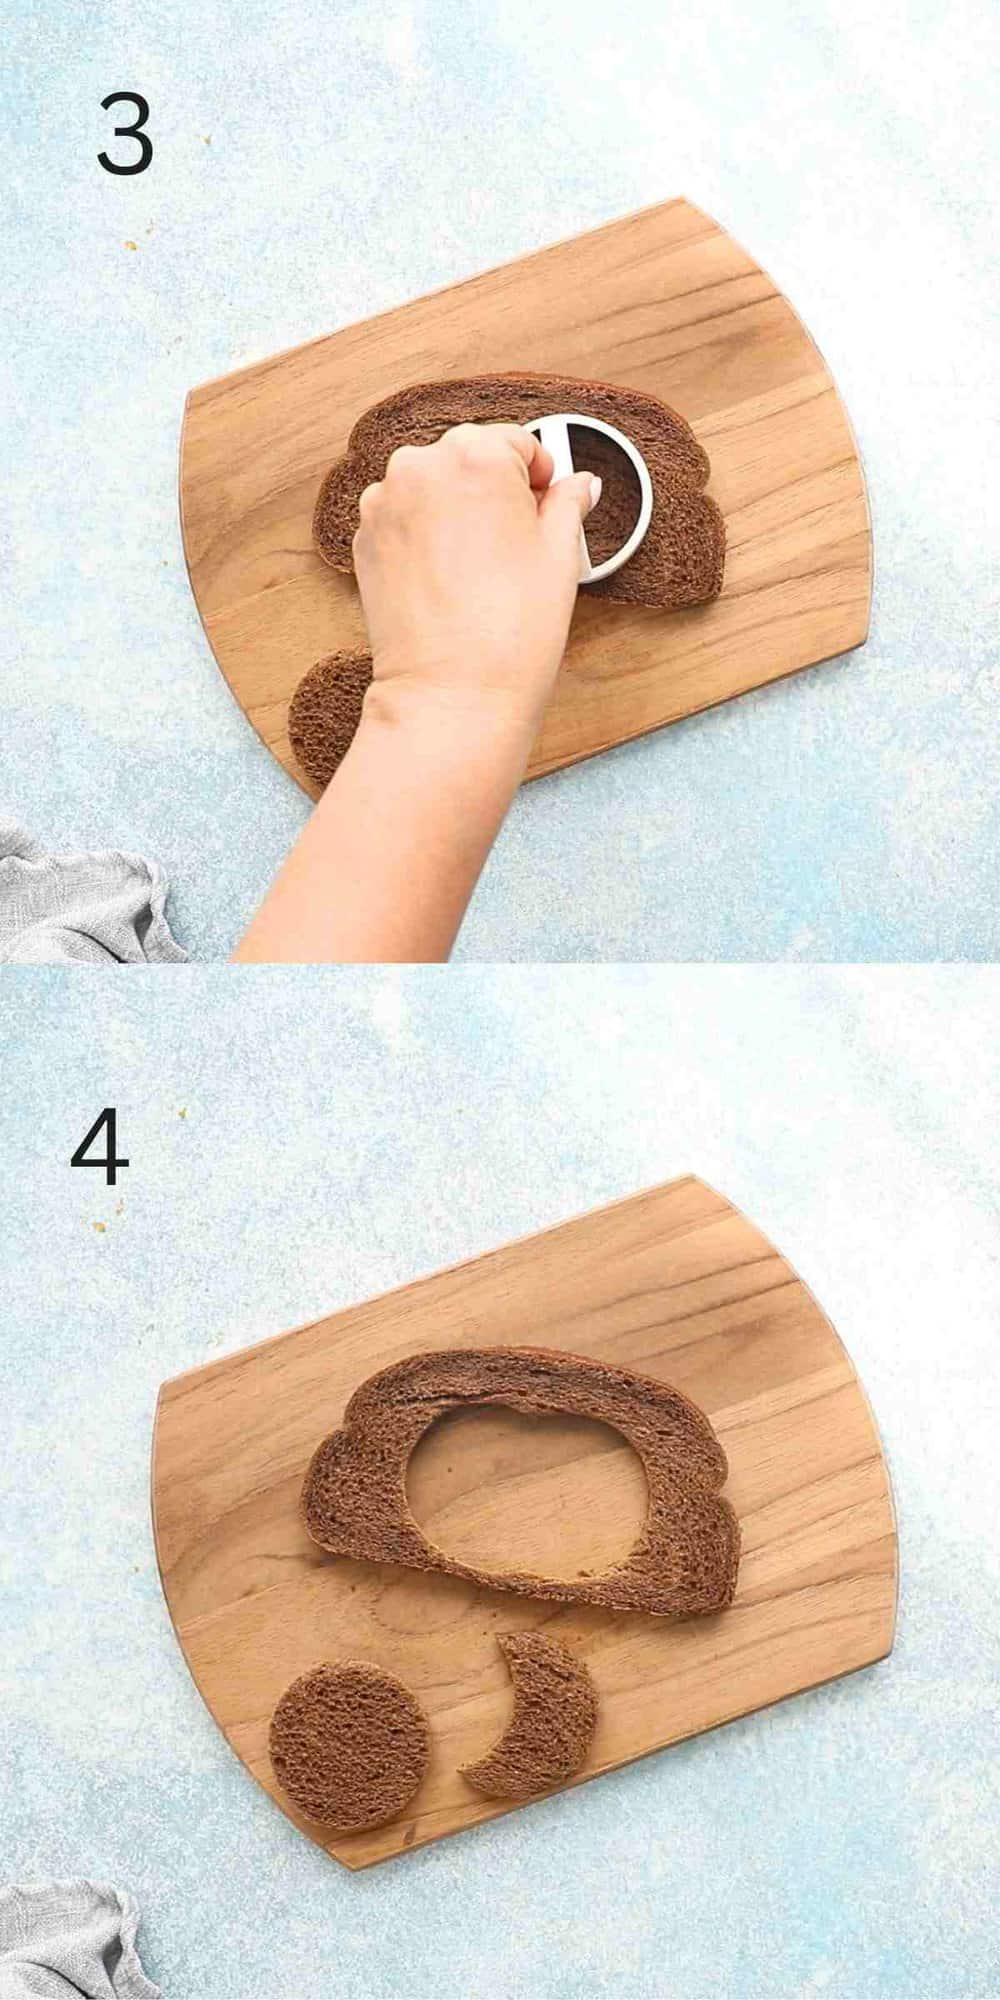 2 photo collage of a hand punching out a circle from a slice of bread using a cookie cutter.